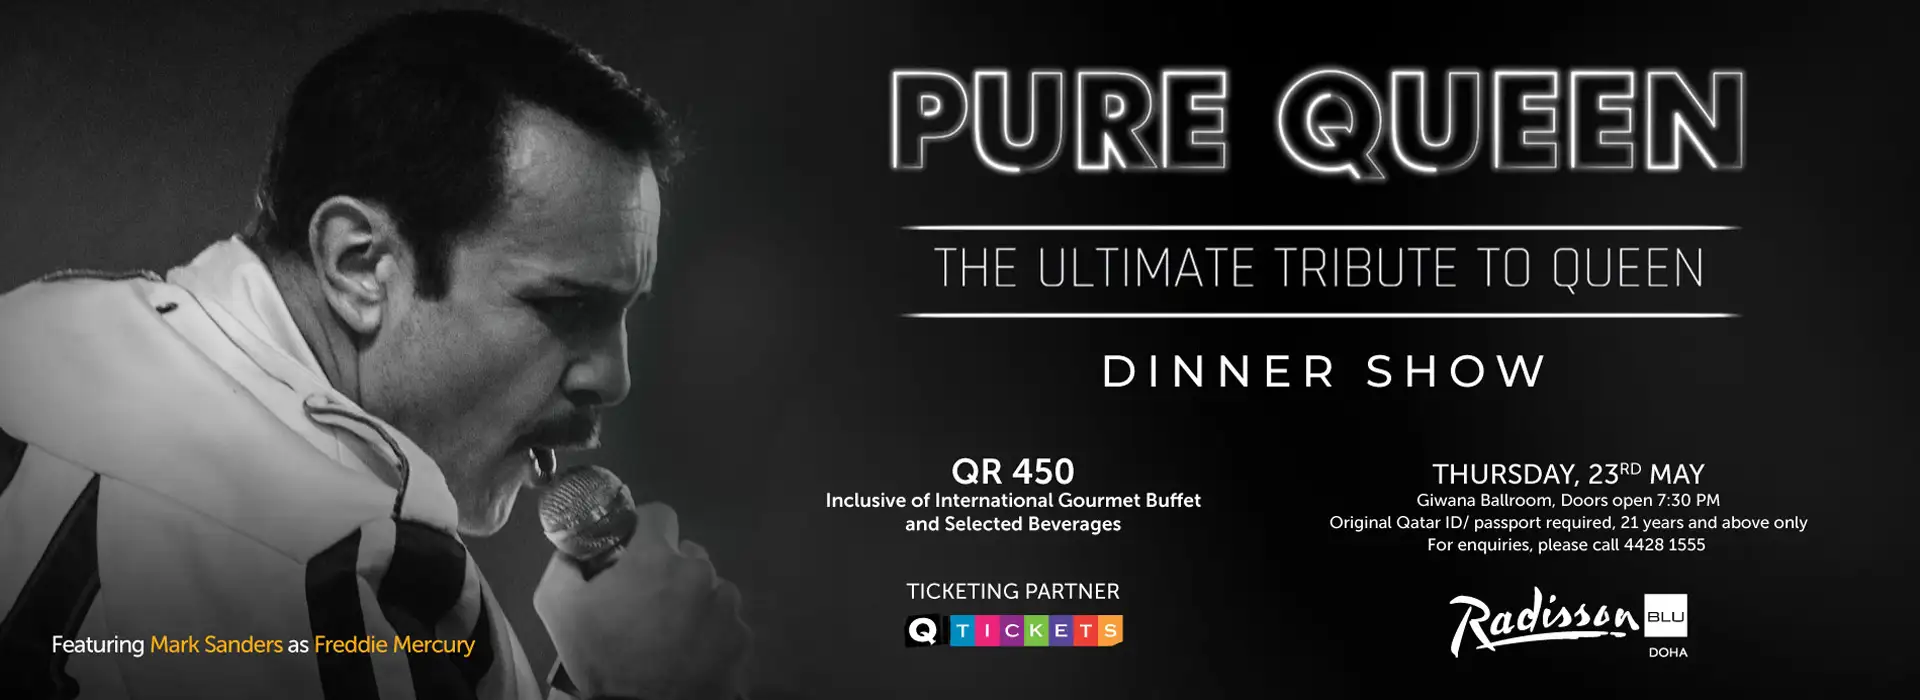 PURE QUEEN - TRIBUTE DINNER SHOW